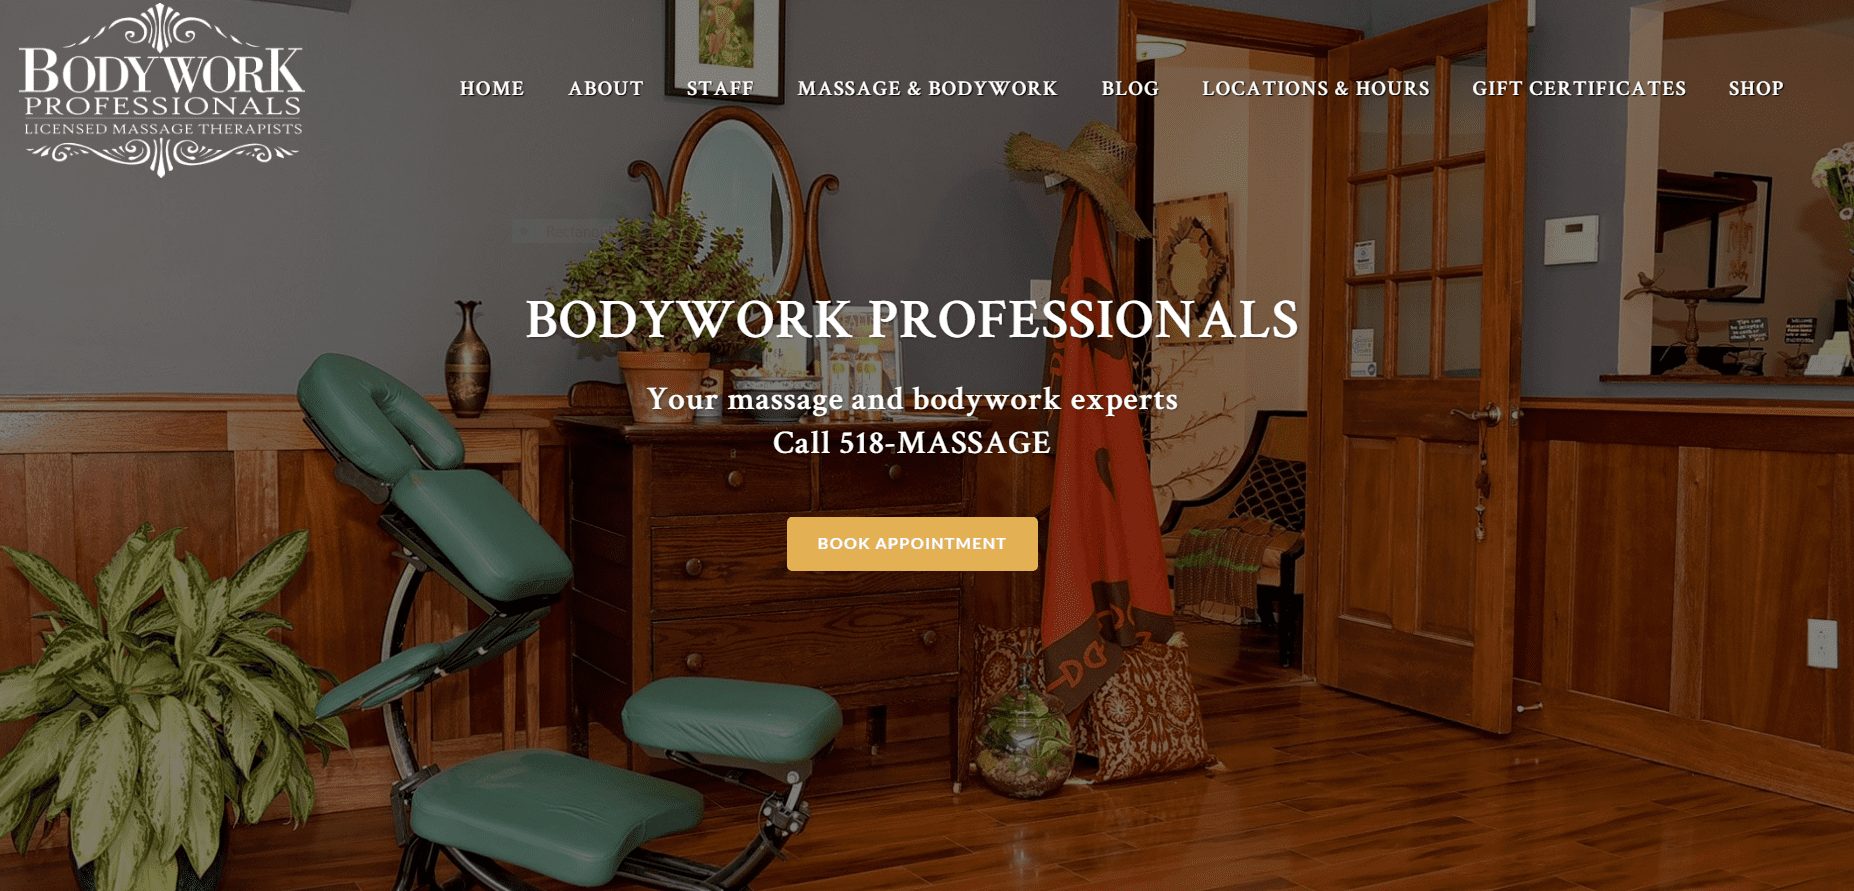 BodyWork Professionals SEO Work and Review